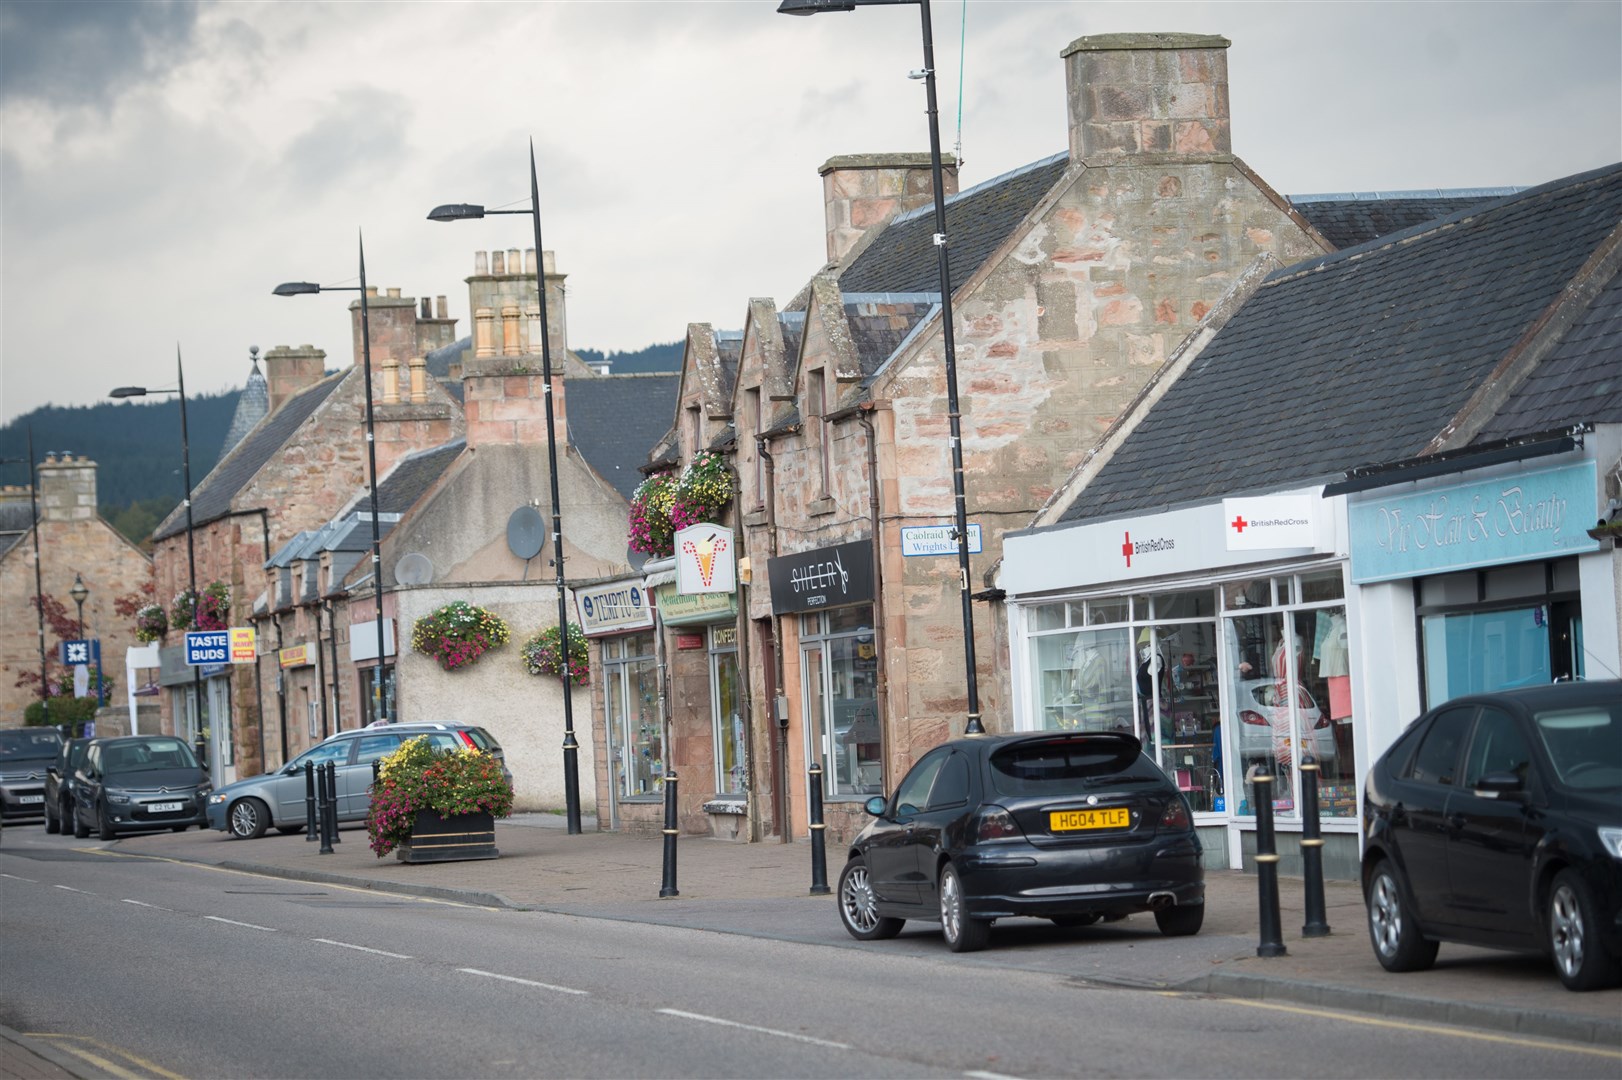 High streets – such as that in Alness – are vital to their local communities.